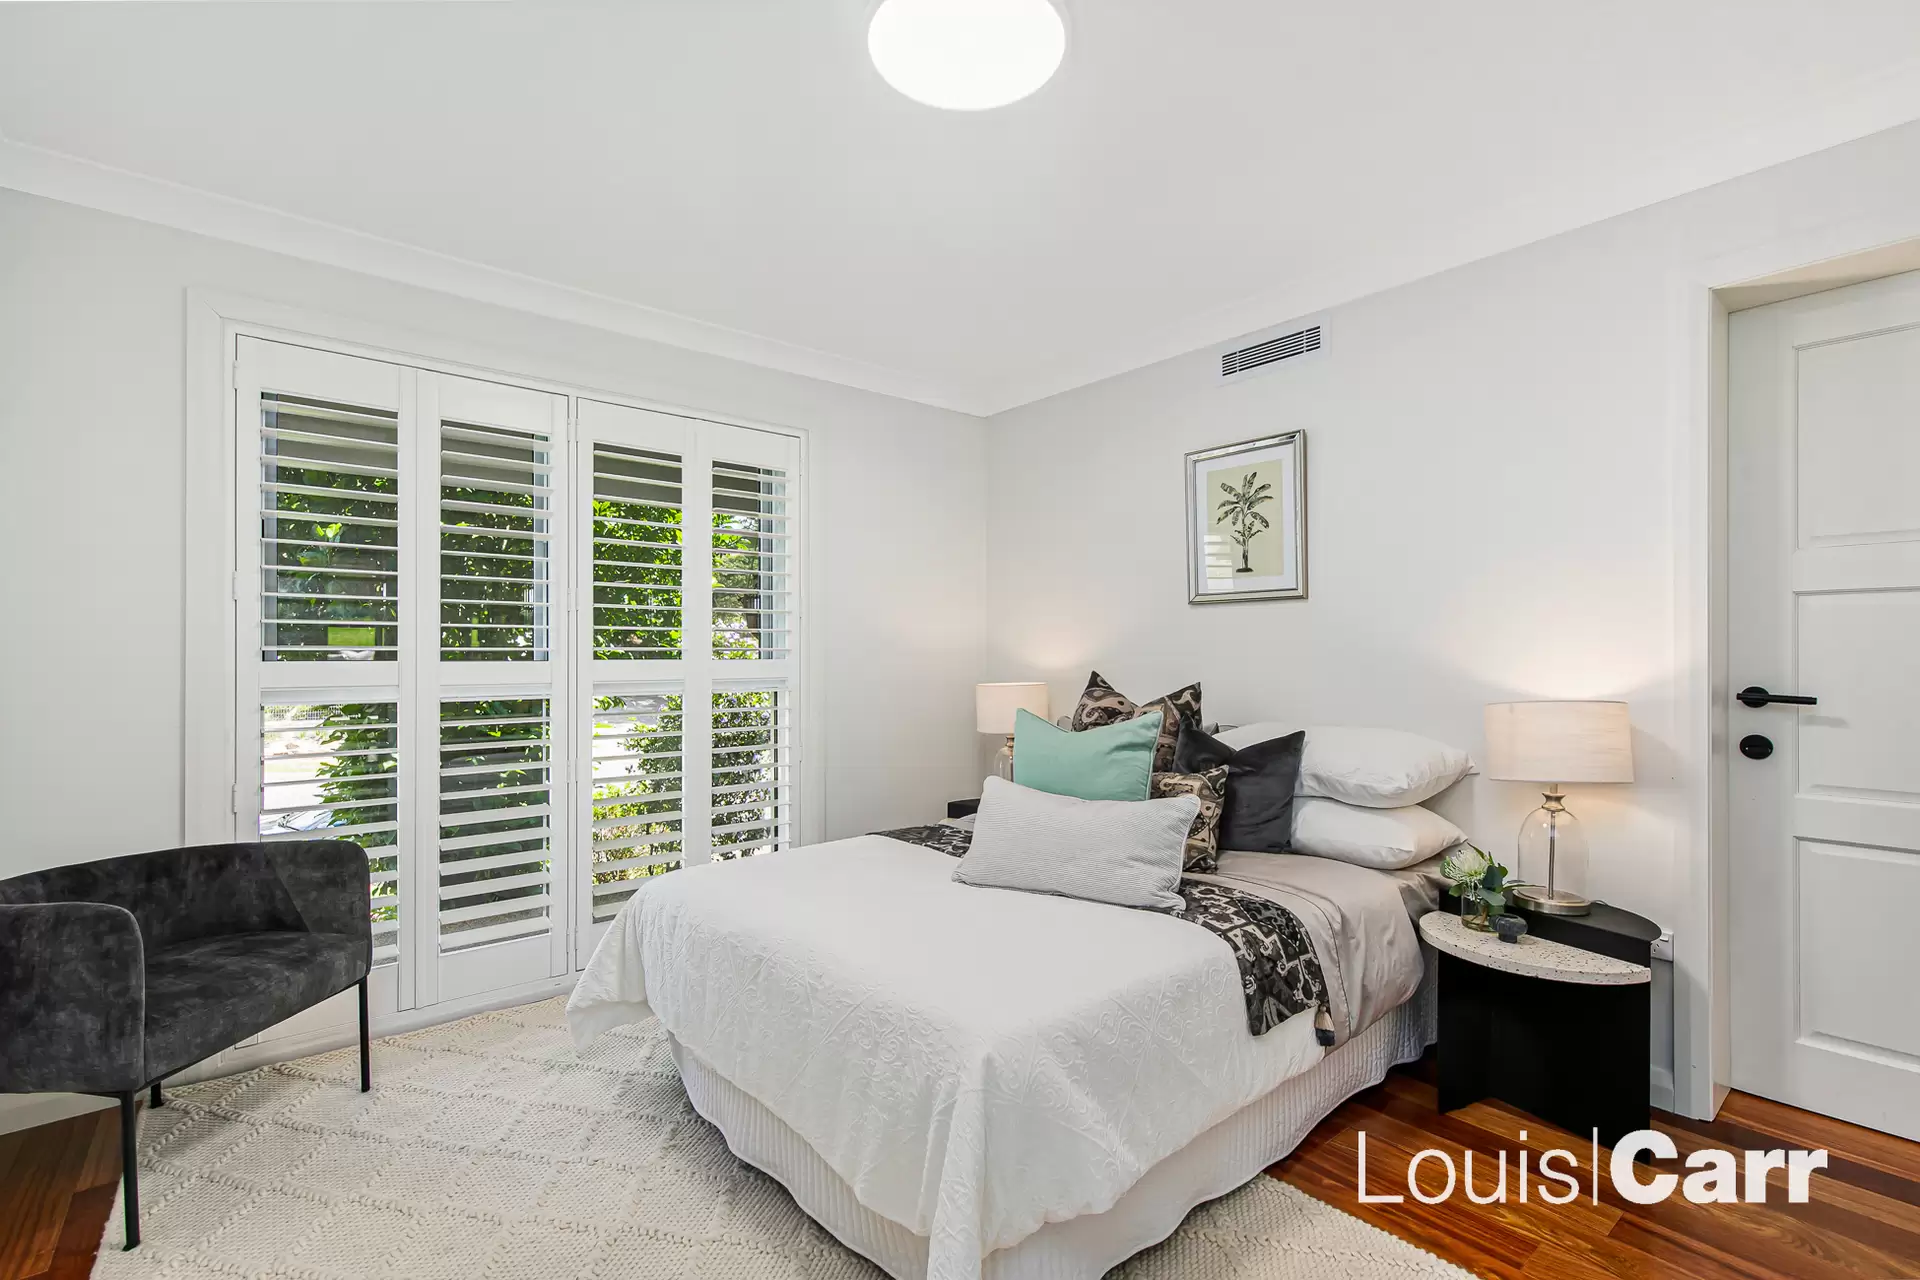 Photo #13: 38 Coonara Avenue, West Pennant Hills - Sold by Louis Carr Real Estate